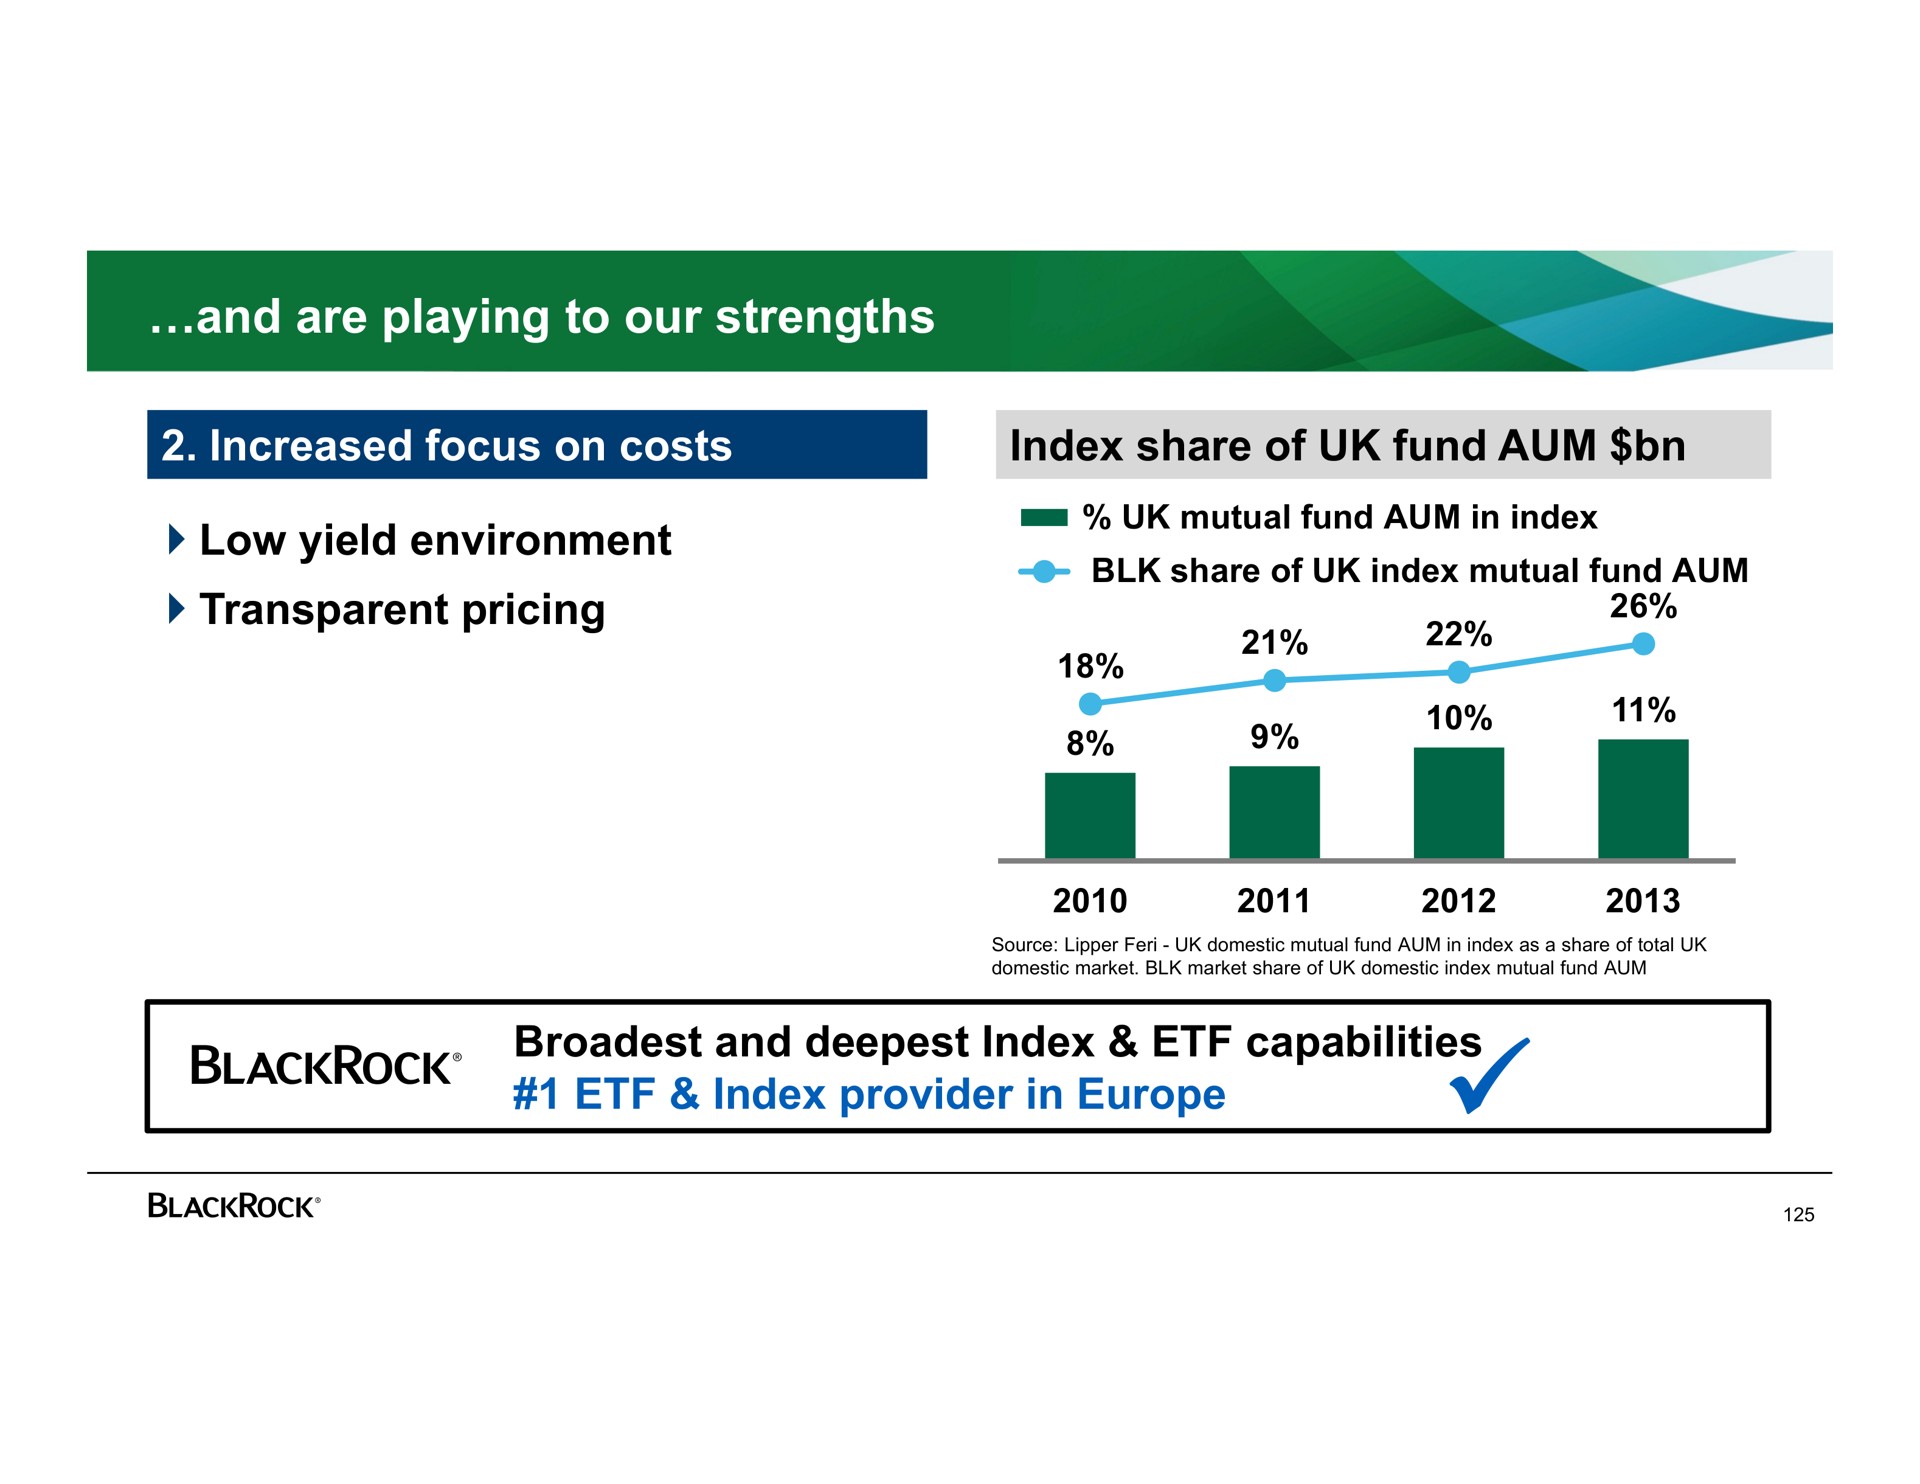 and are playing to our strengths increased focus on costs index share of fund aum low yield environment transparent pricing and index capabilities index provider in | BlackRock